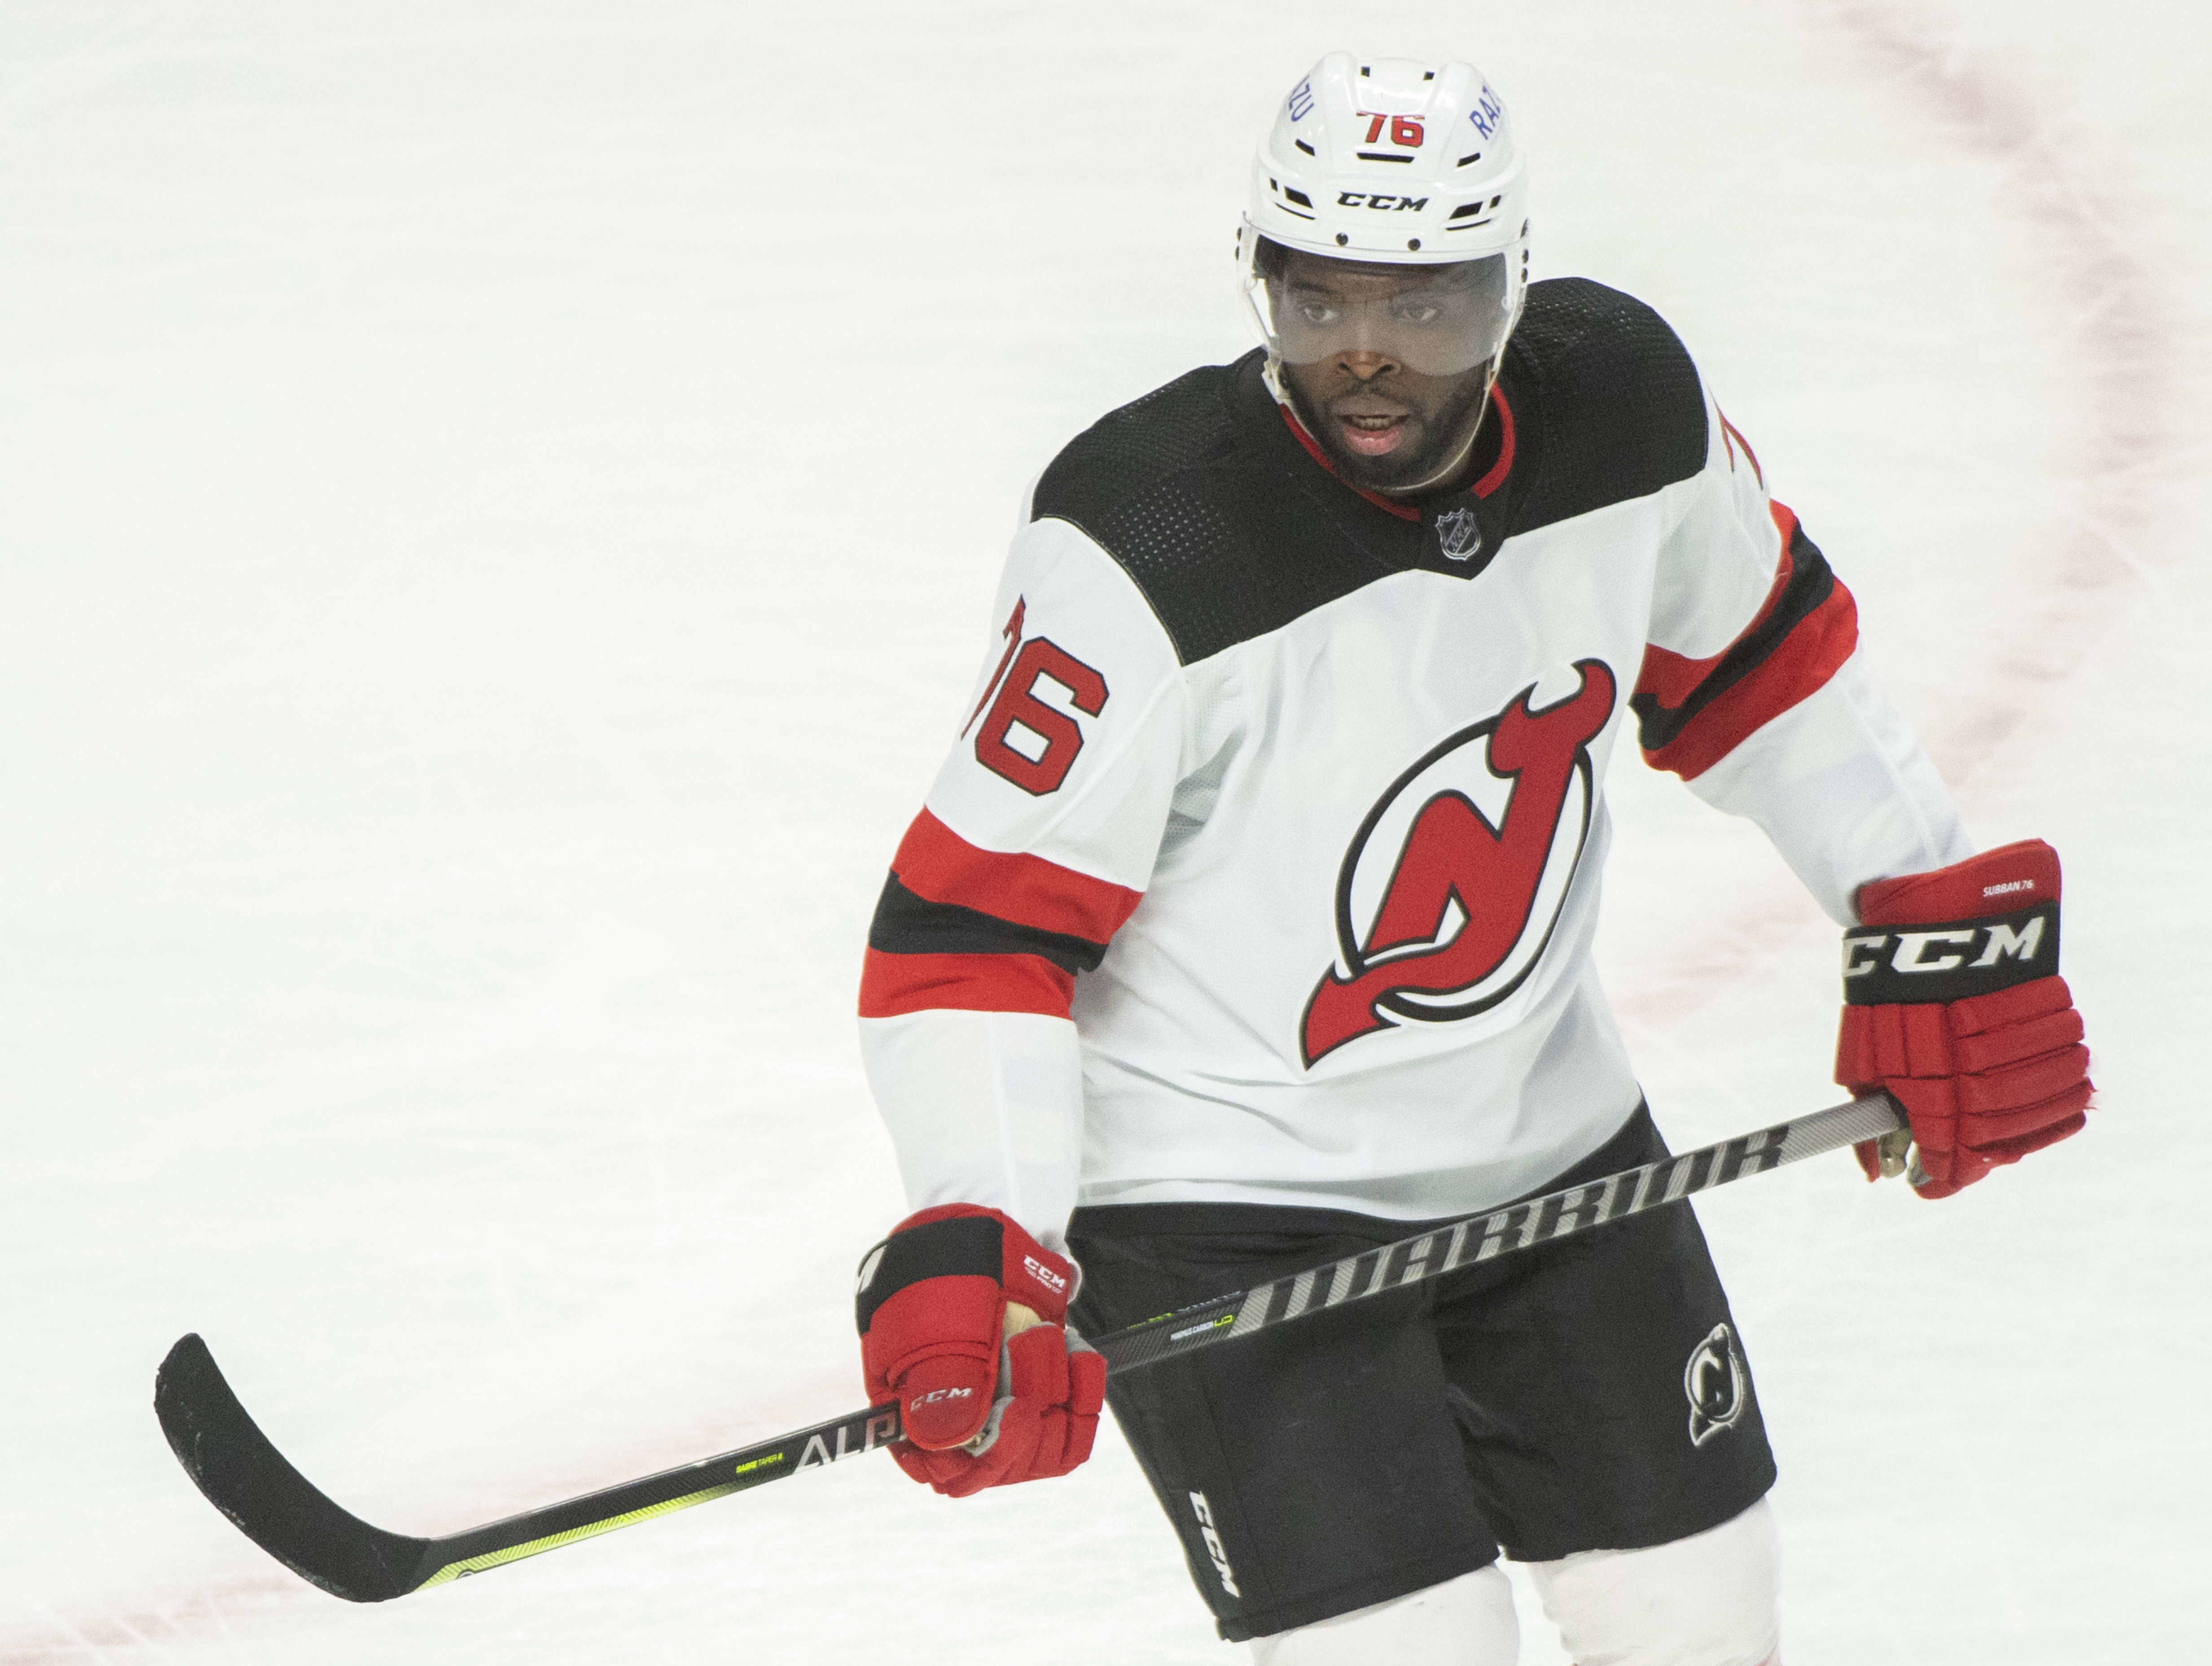 P.K. Subban retires after 13-year NHL career